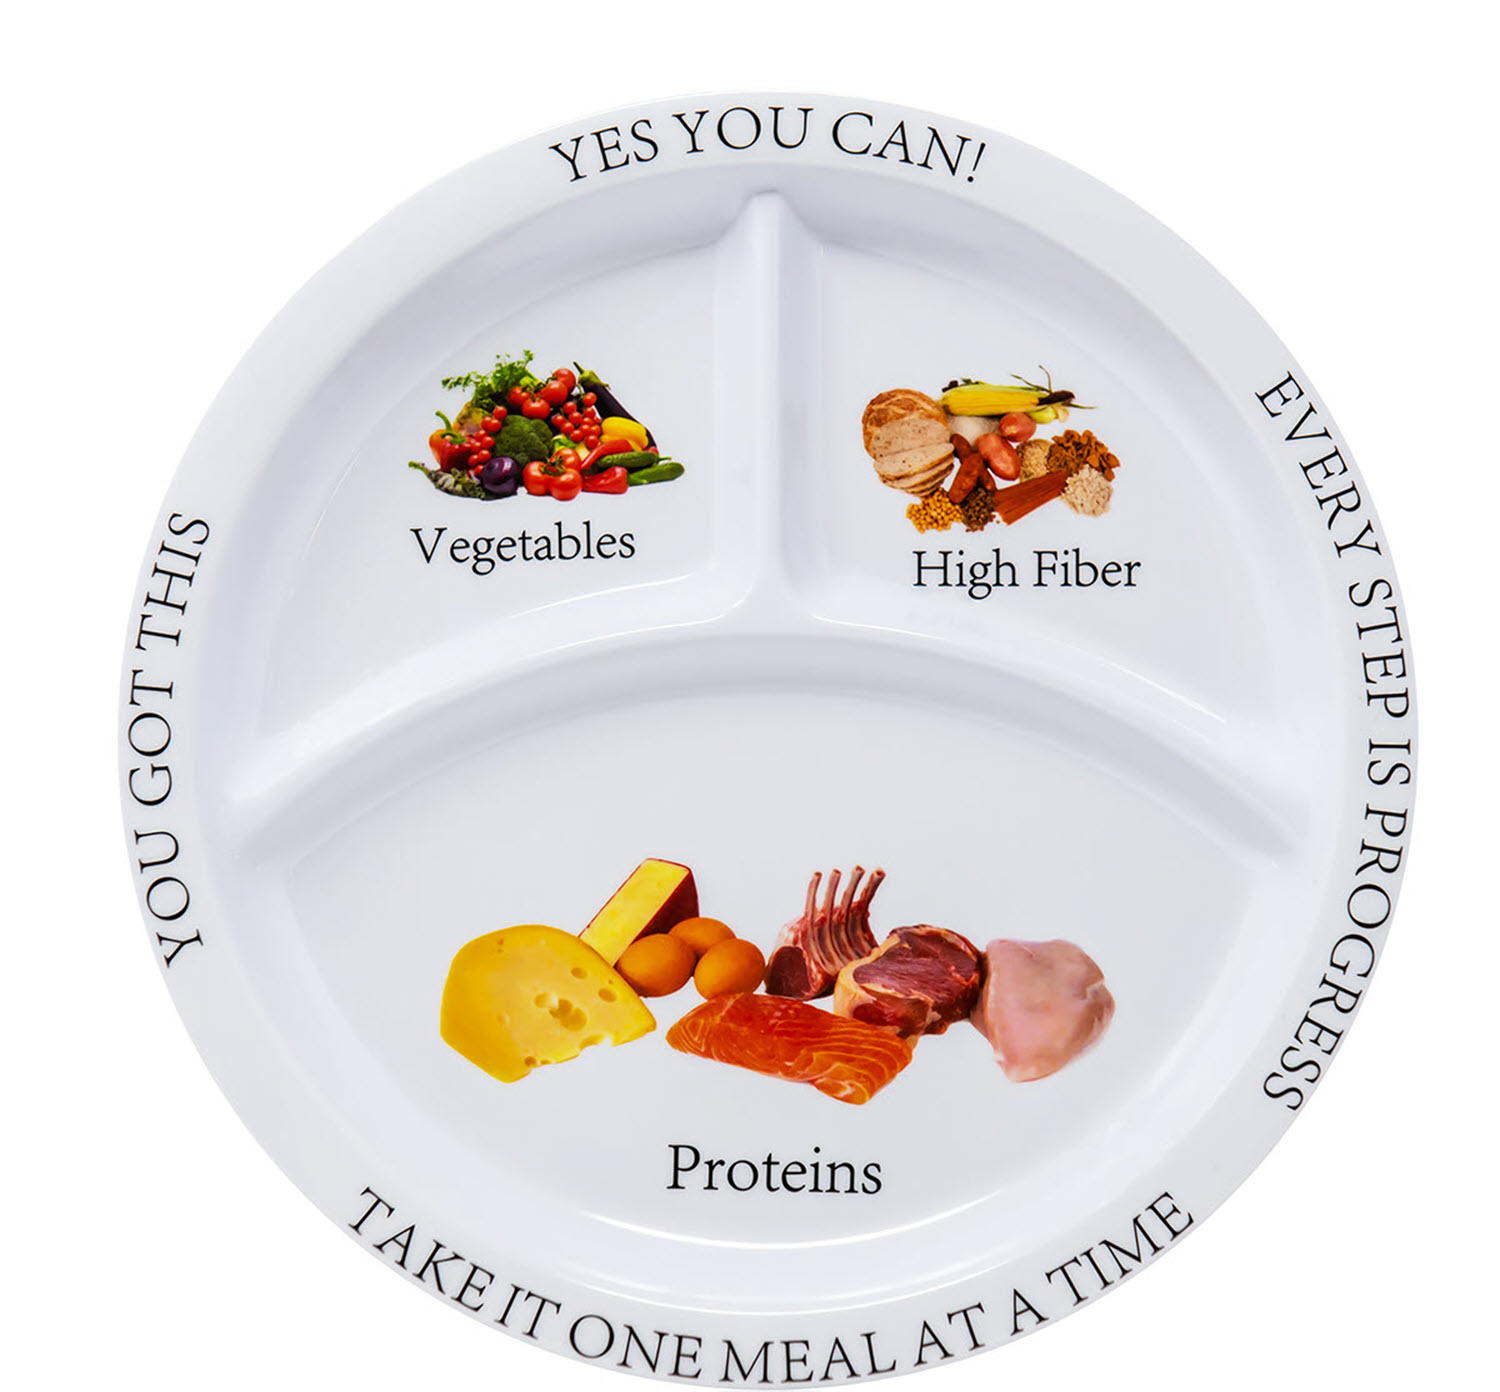 Portion Control Plates Melamine Round for Weight Loss by Universal Body Labs - image 1 of 8